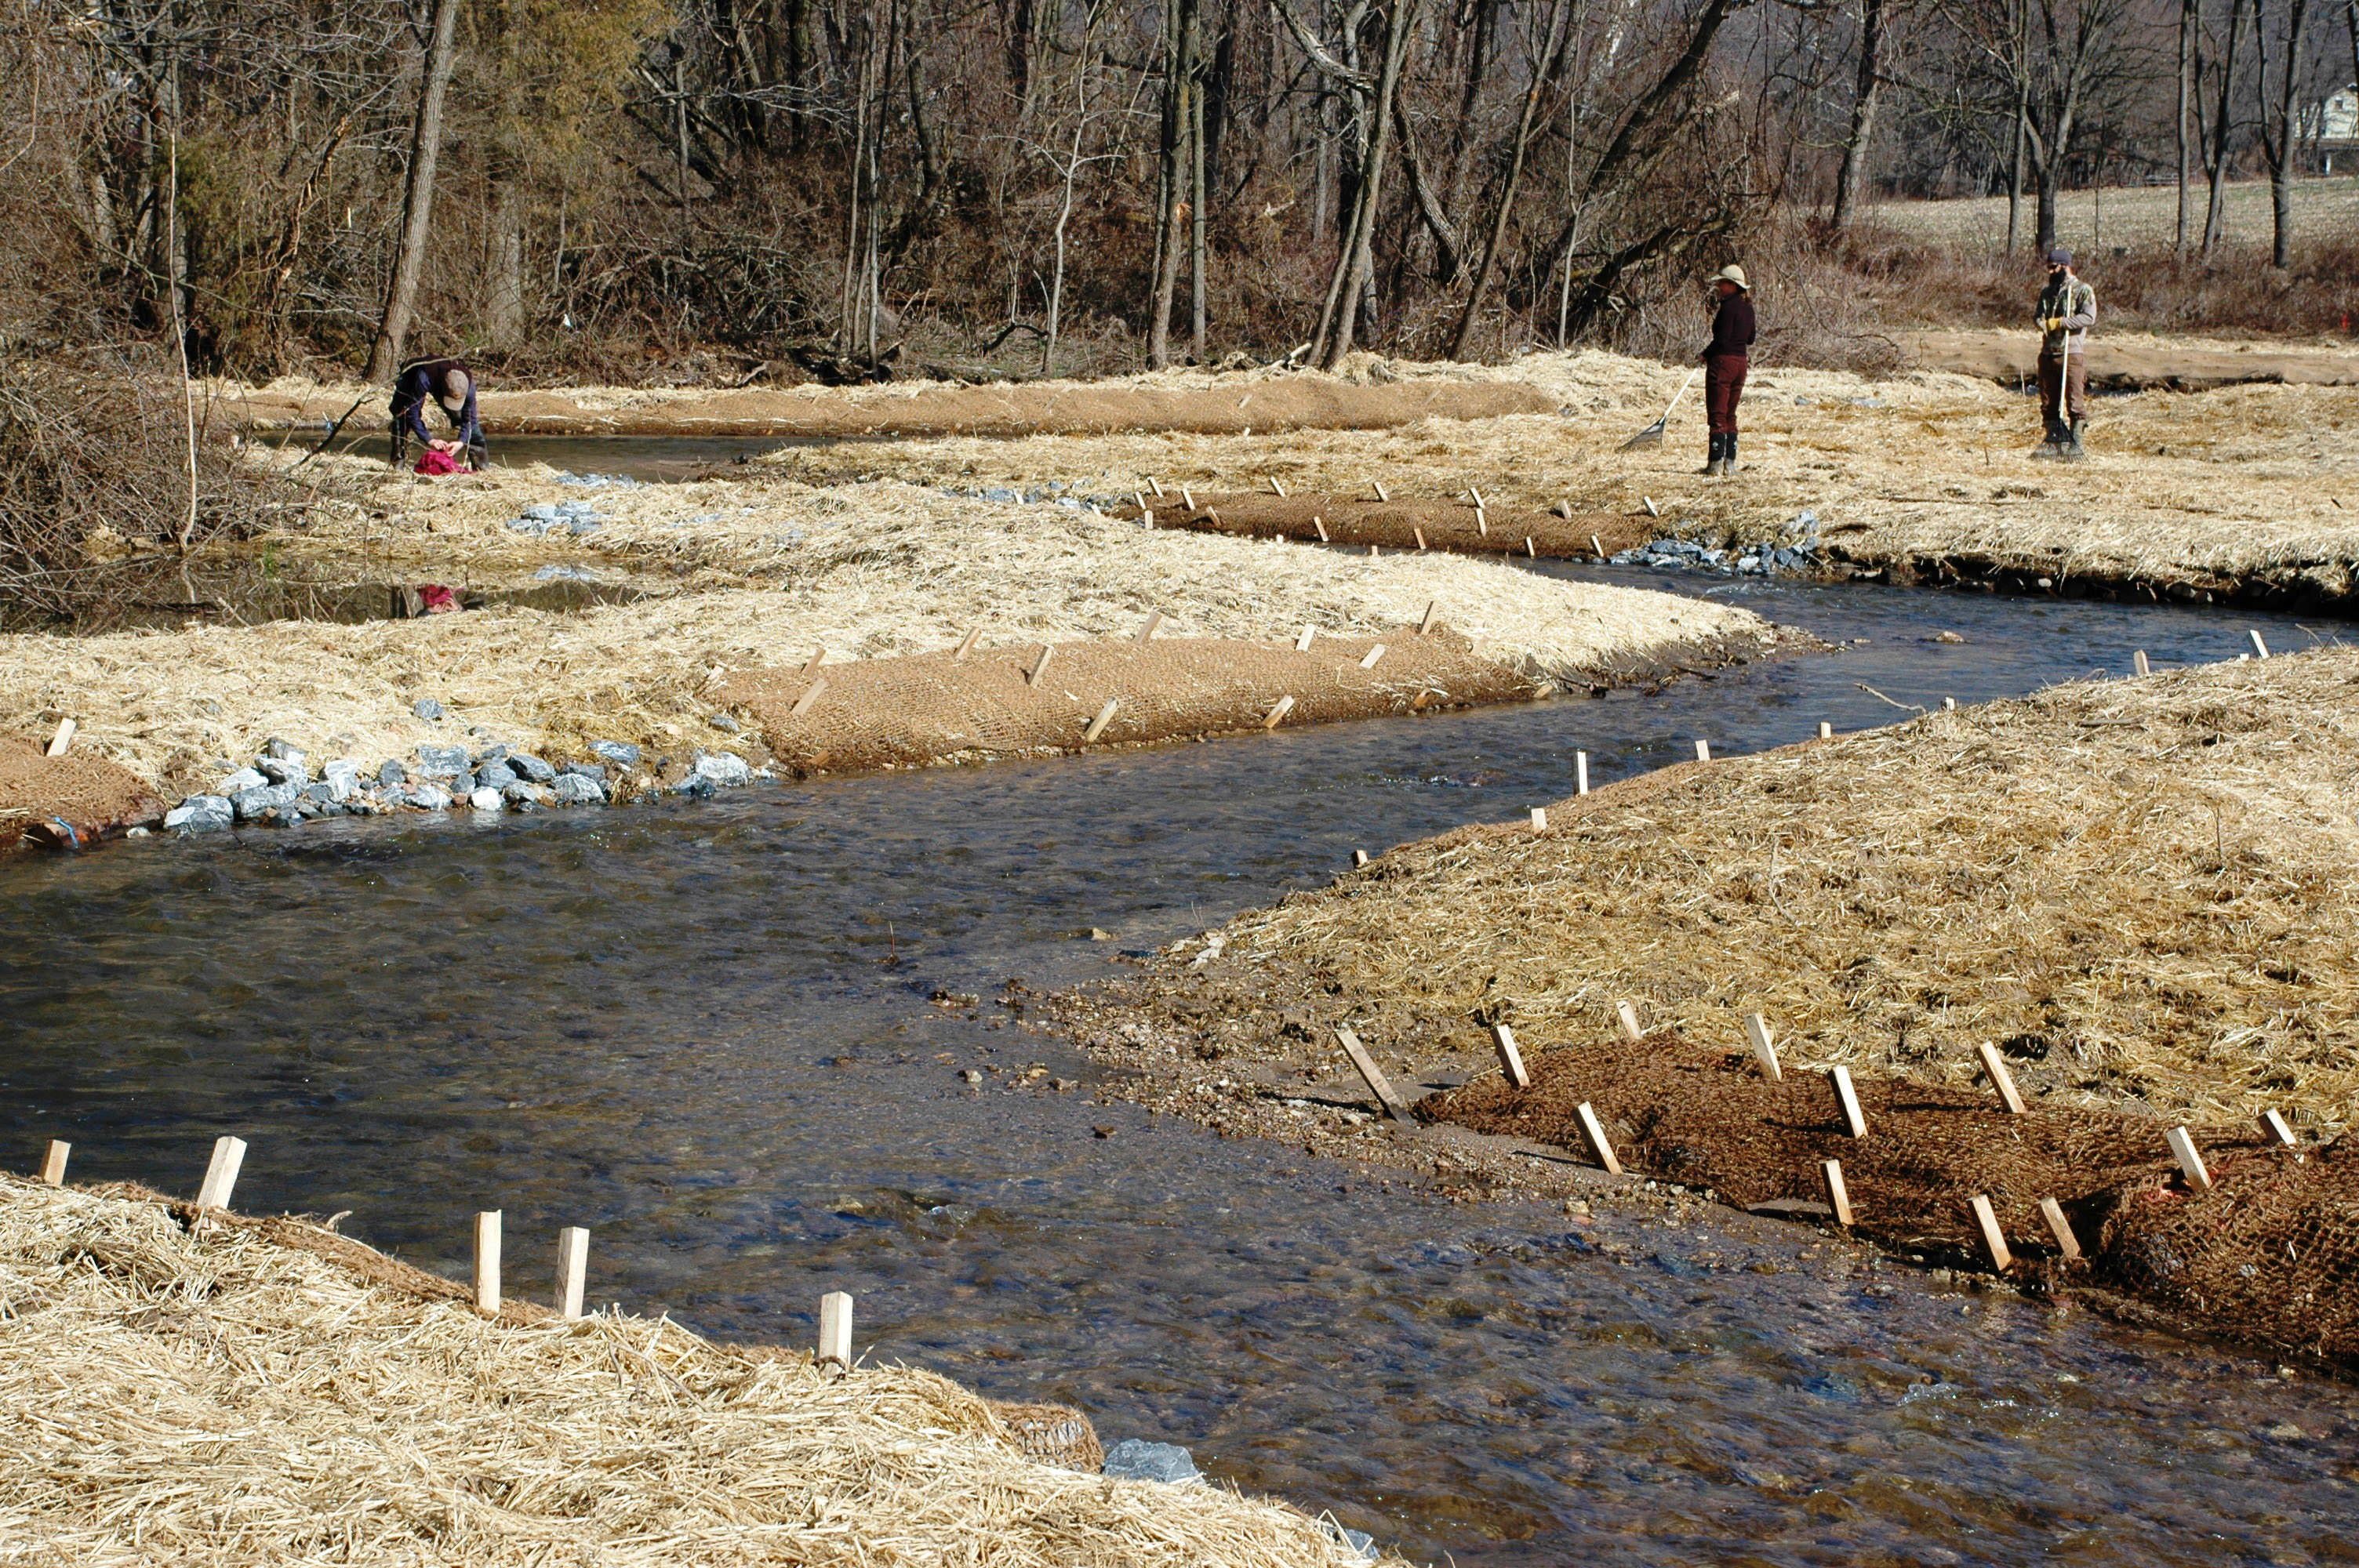 A creek winds in a sinuous s-curve through a restoration site. The banks are covered in protective straw.